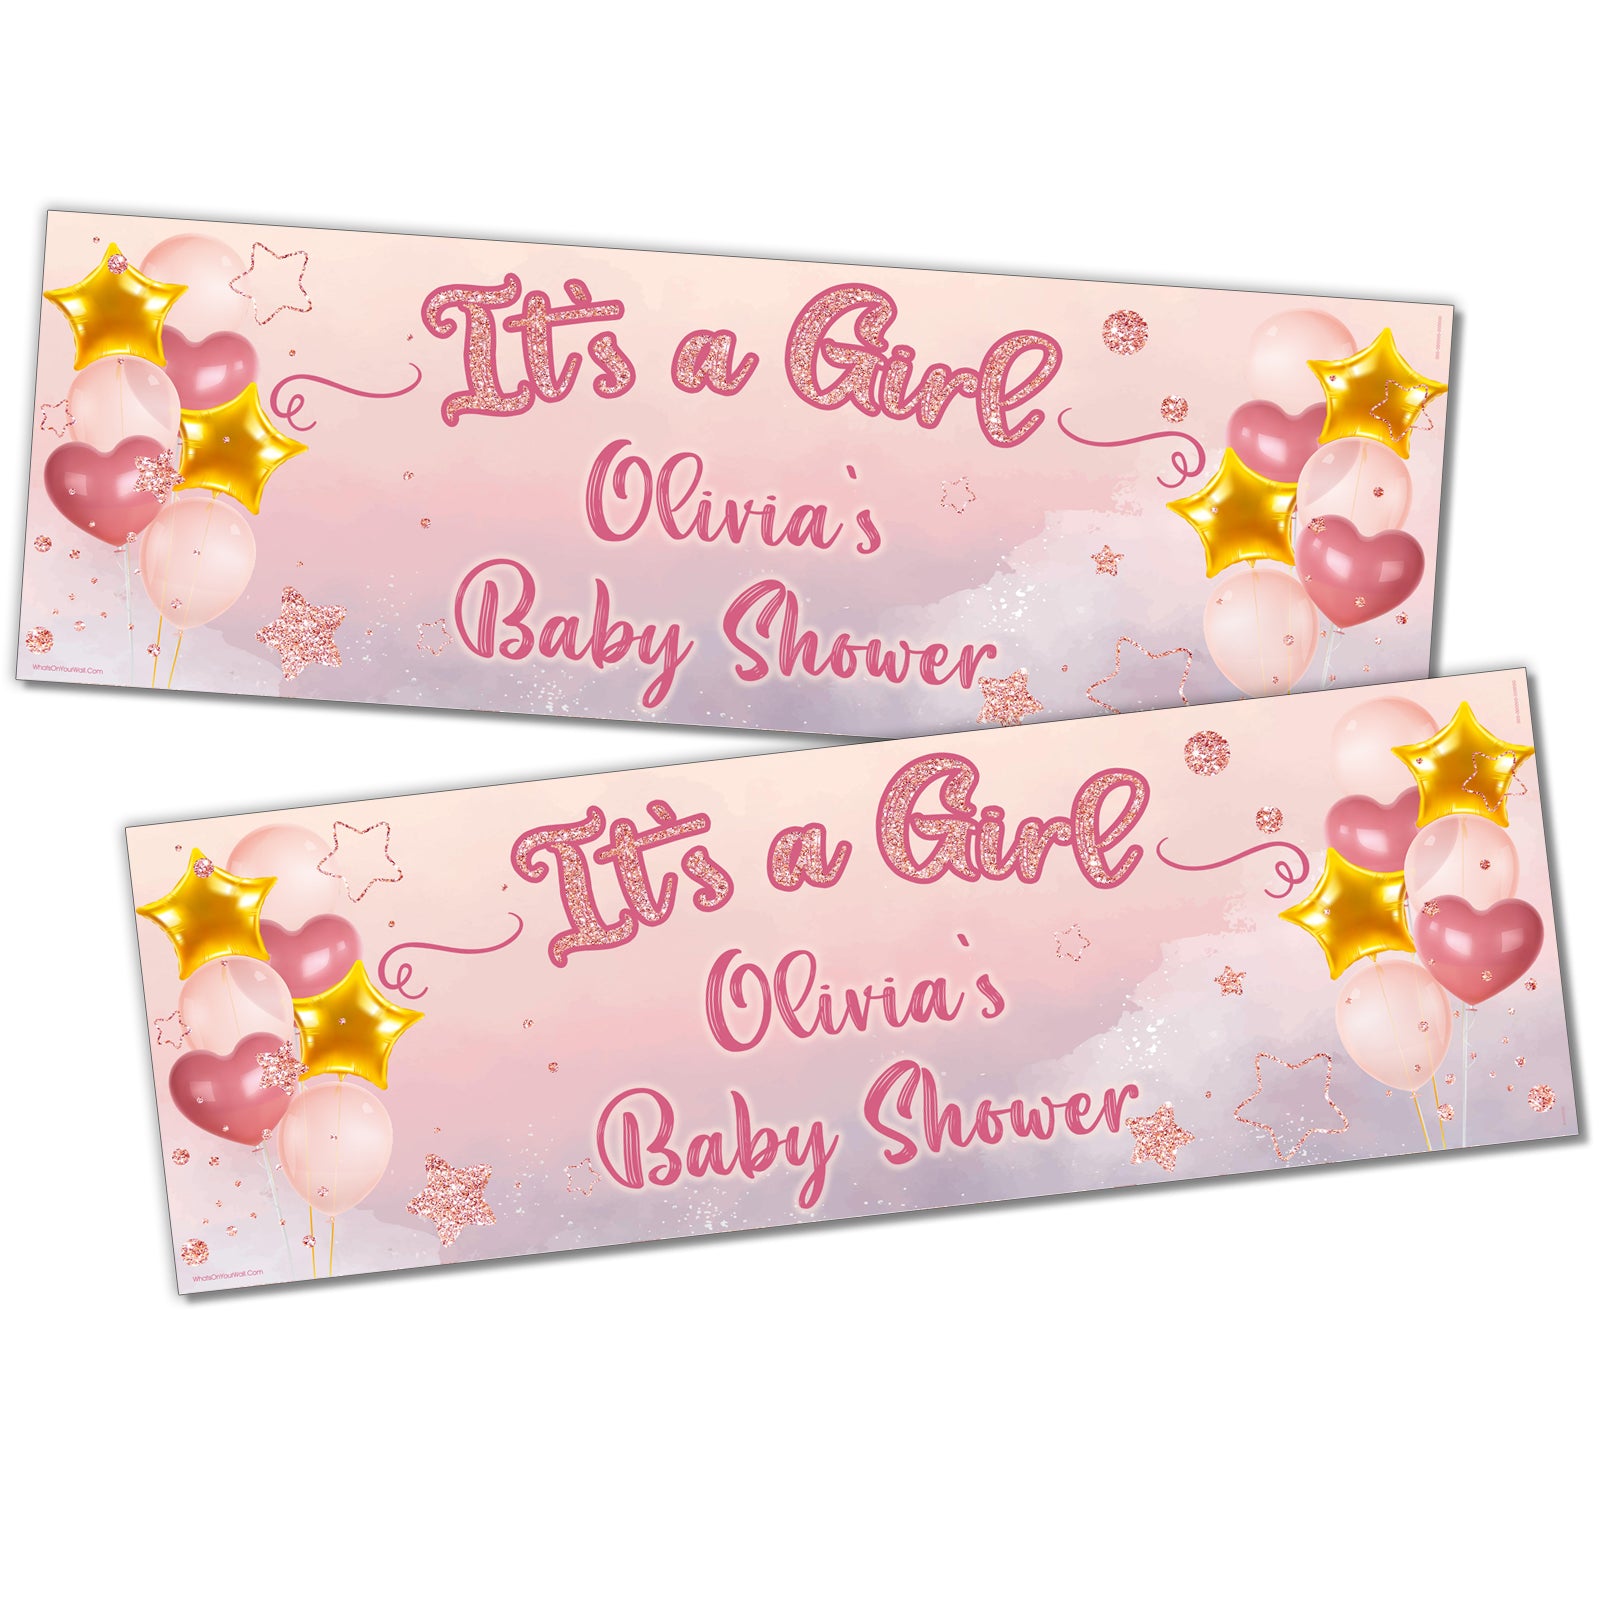 personal birthday banners